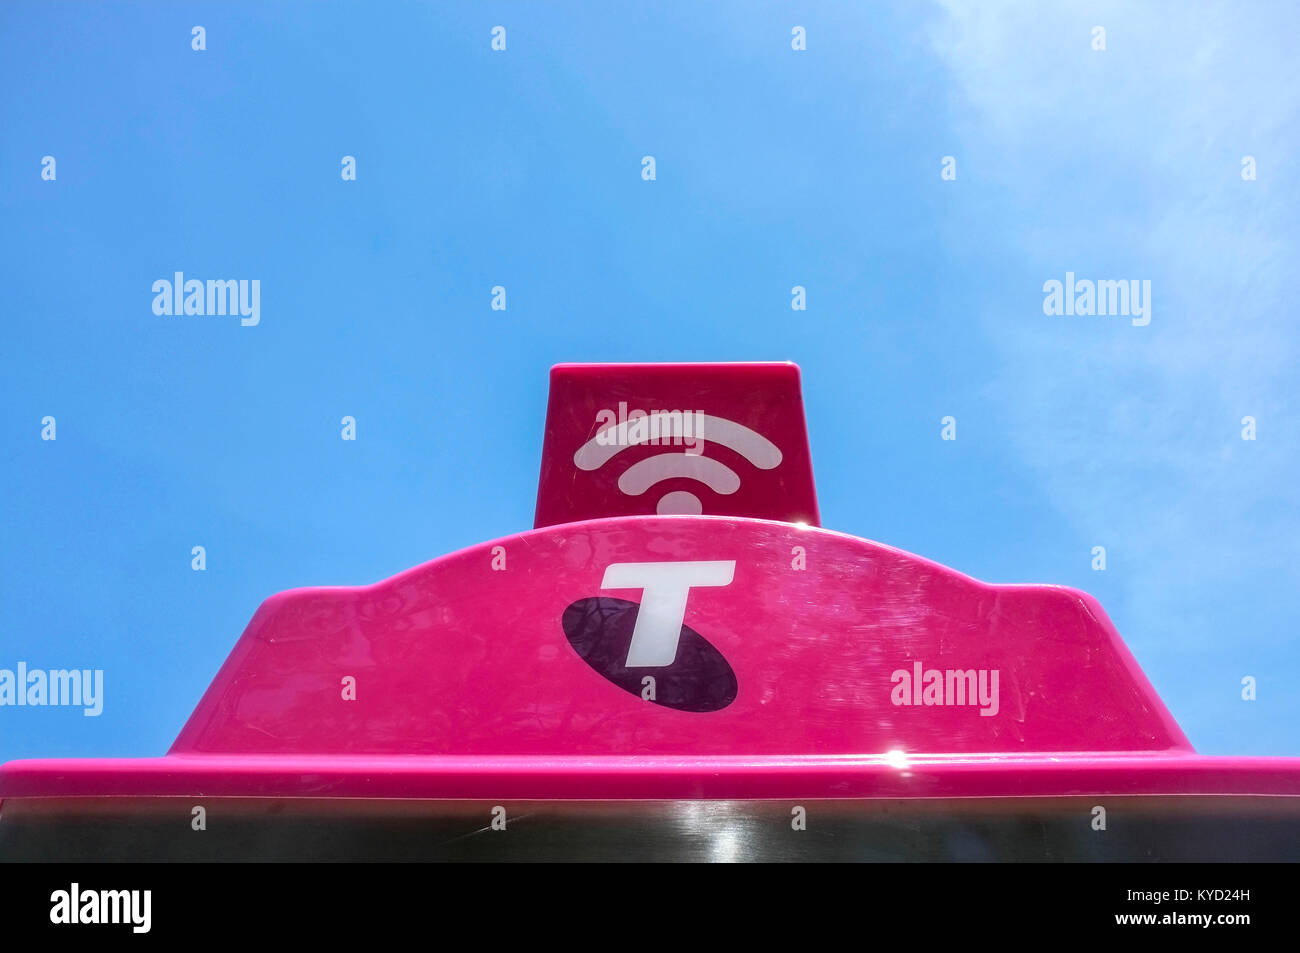 The top of a Telstra public phone booth, which double as a Wi Fi hot spot. Stock Photo